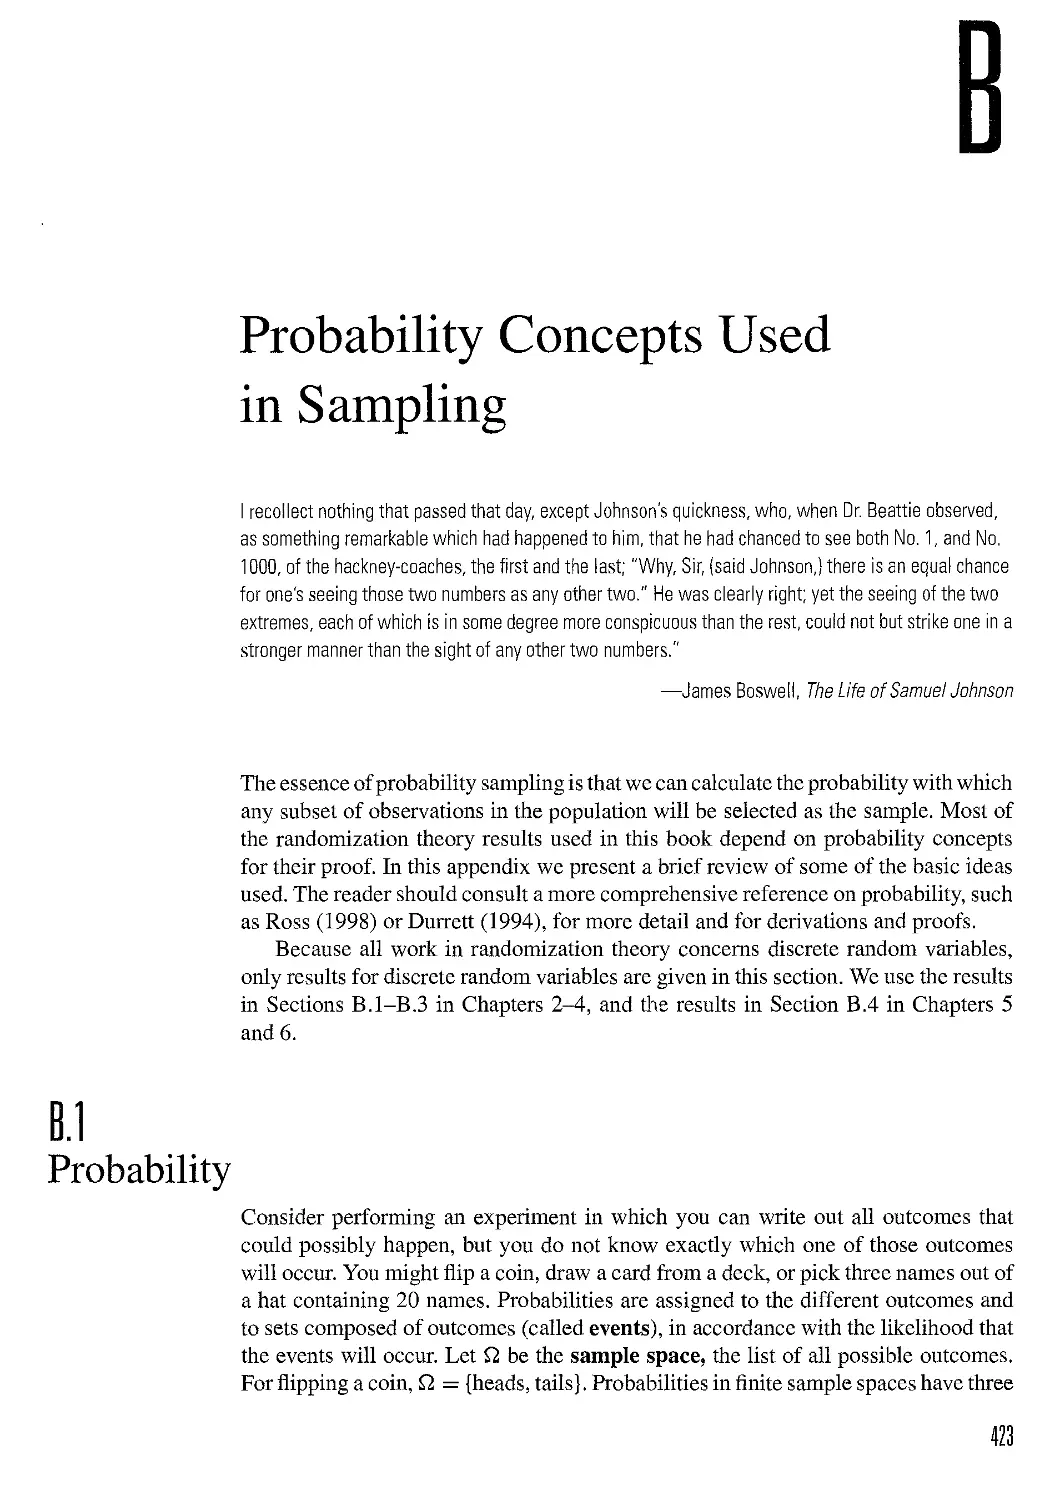 B Probability Concepts Used in Sampling